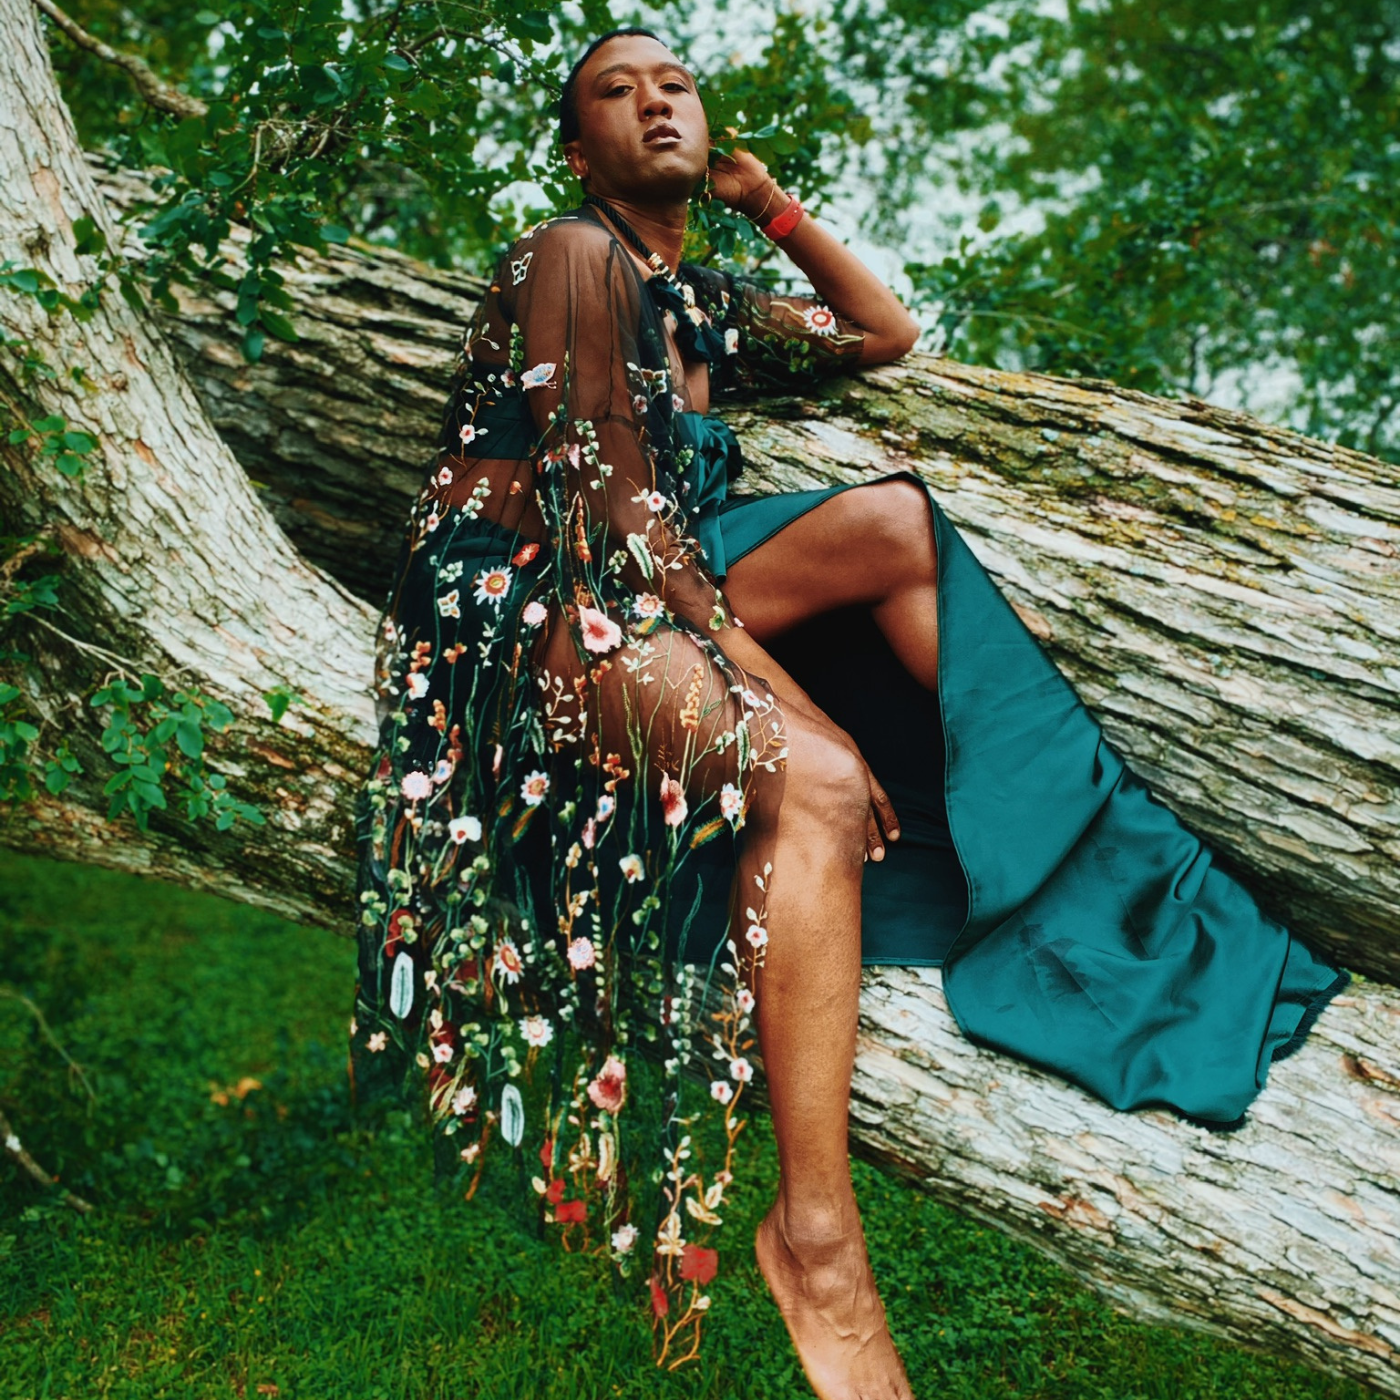 Terrance sits in a tree wearing a dark green floral caftan and looking at the camera. His left hand is up by his head and his left leg is up on the tree branch he is sitting on. His right hand is just past his knee and his right leg is on the ground.